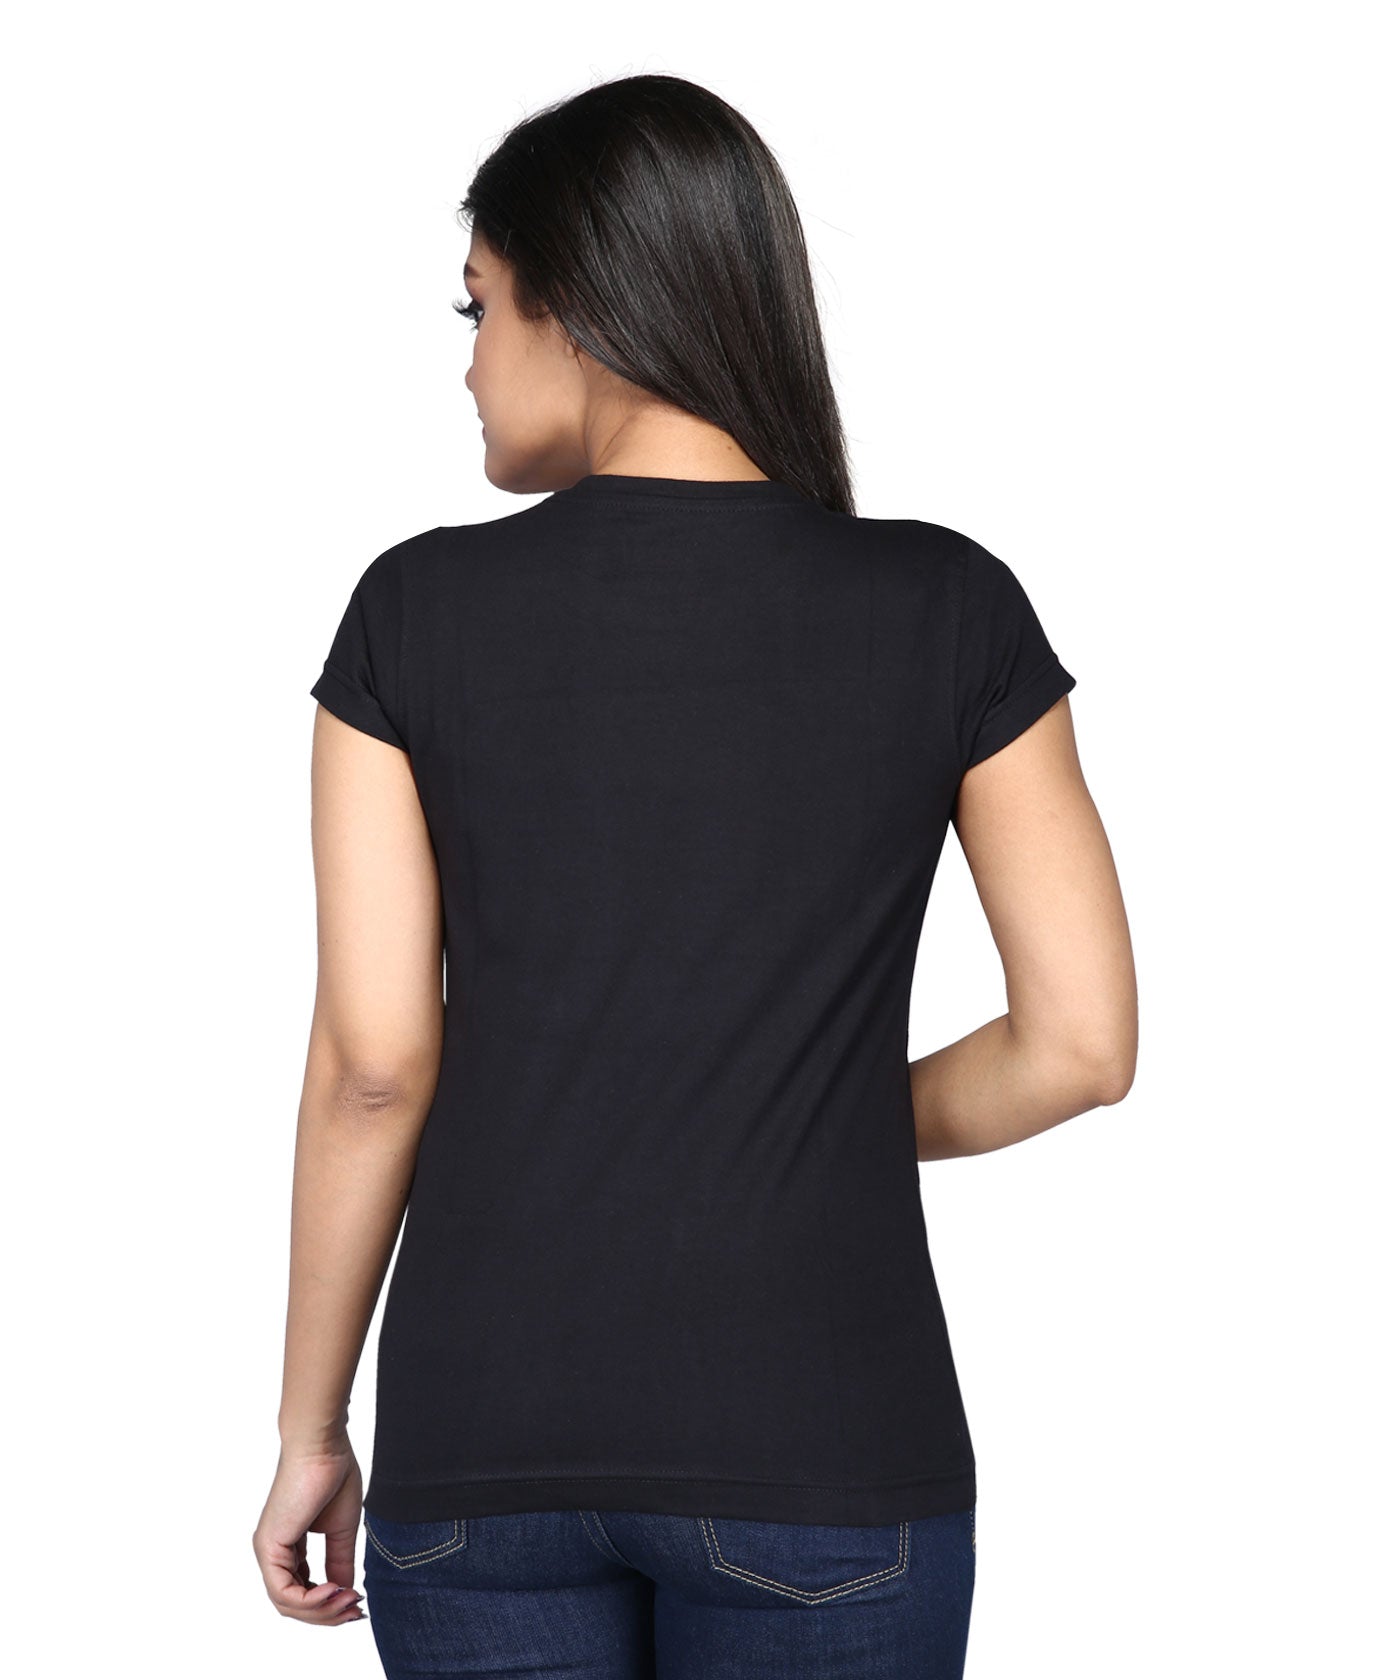 My Love Only beats for HIM - Premium Round Neck Cotton Tees for Women - Black